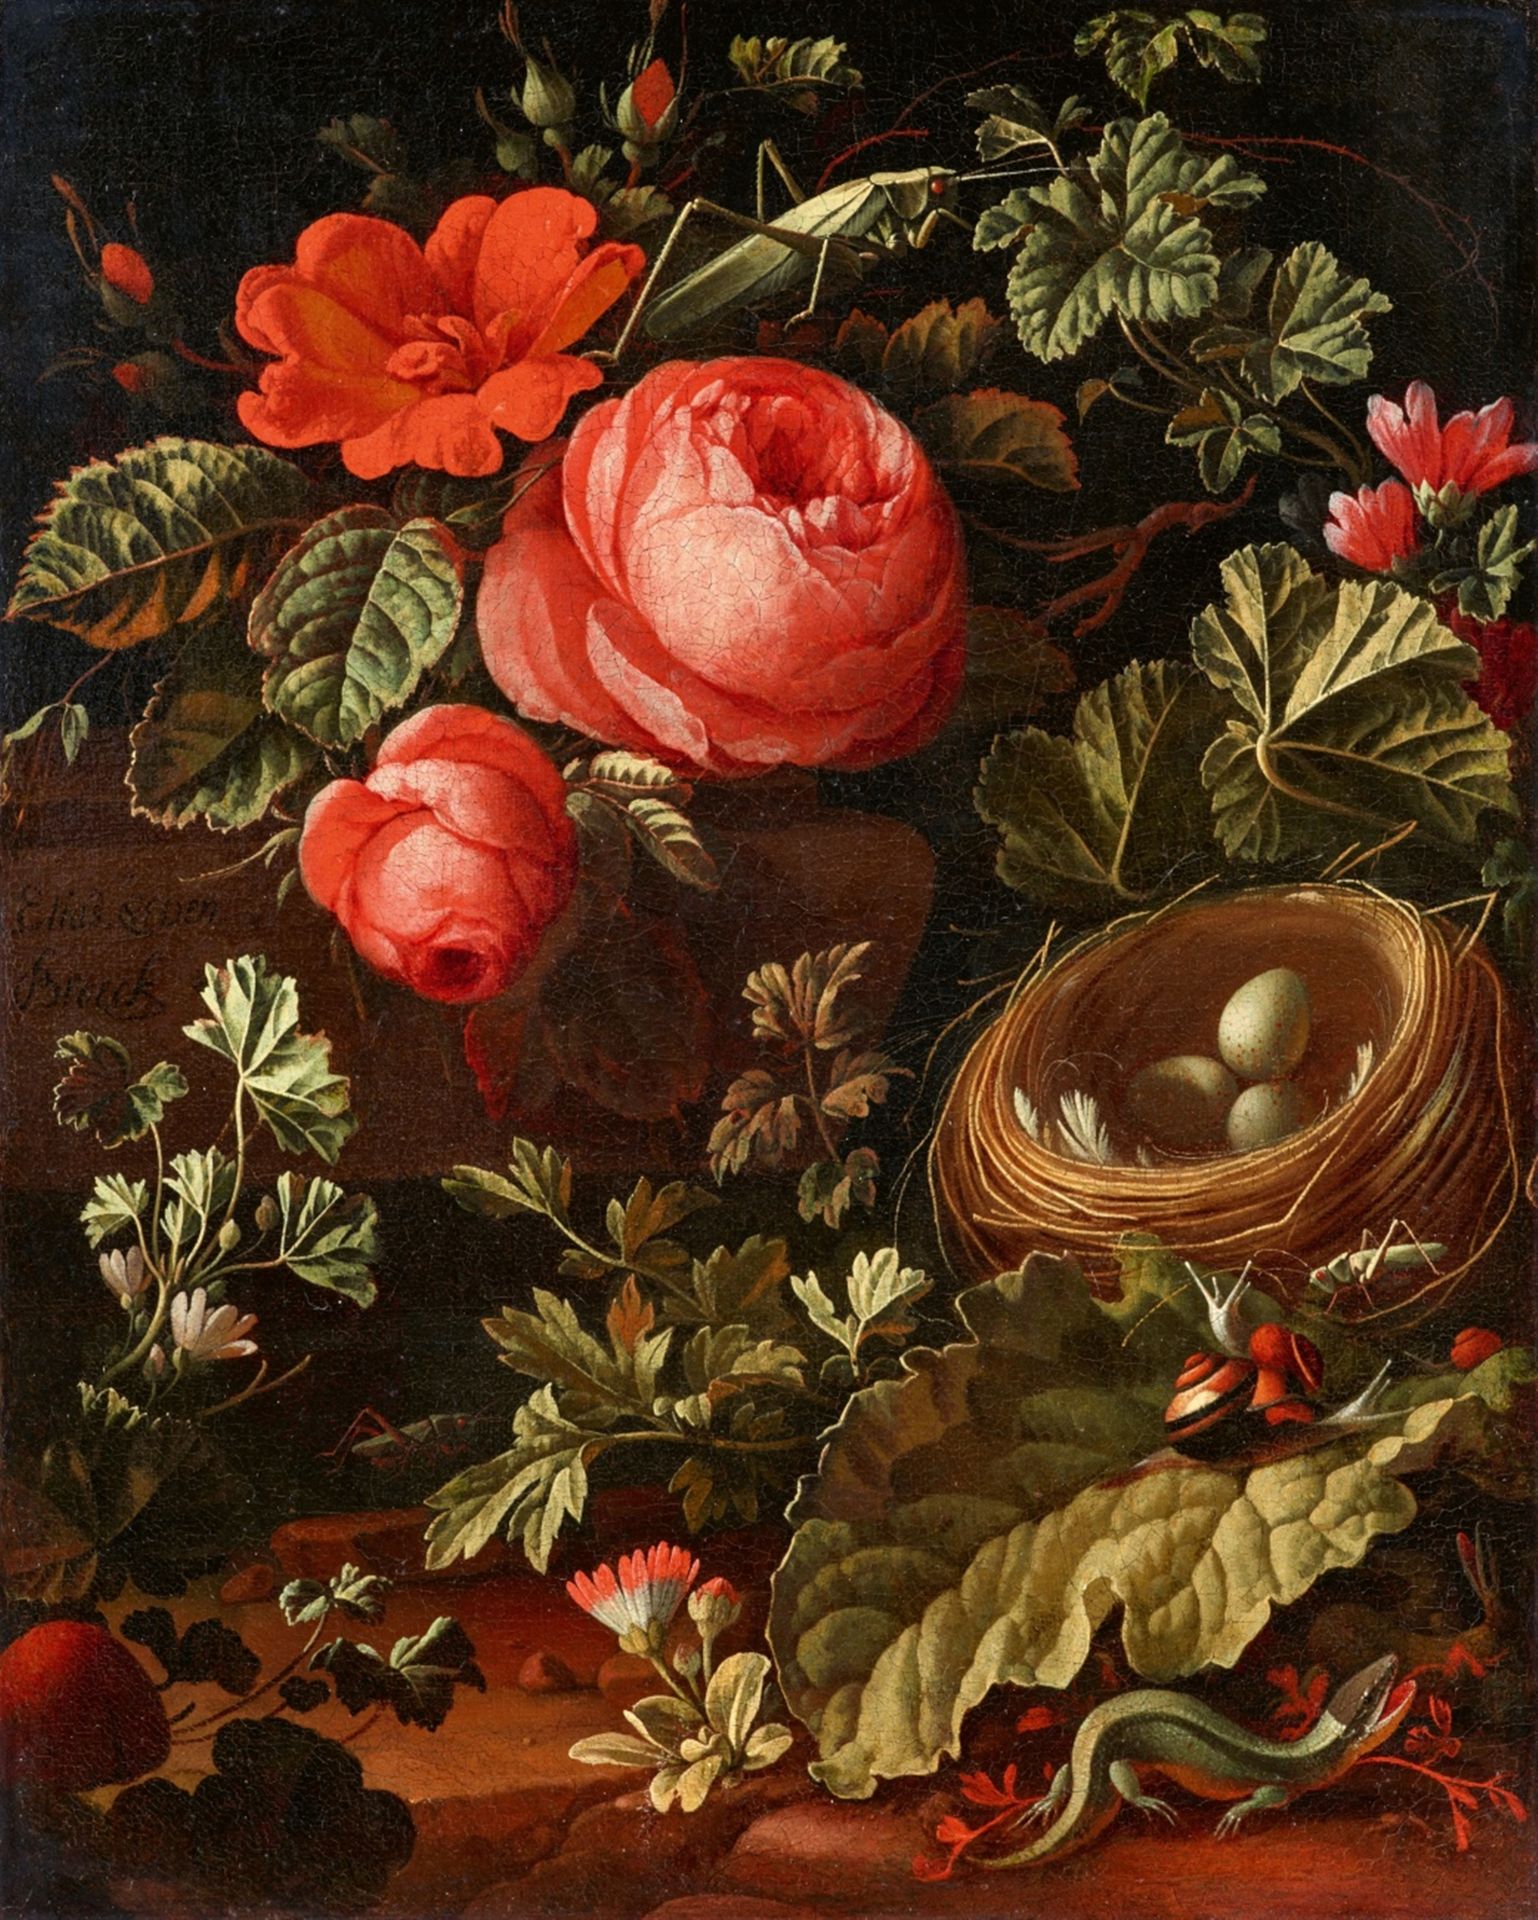 Elias van den Broeck, Forest Floor Still Life with Roses, a Bird's Nest, Lizards, Grasshoppers and S